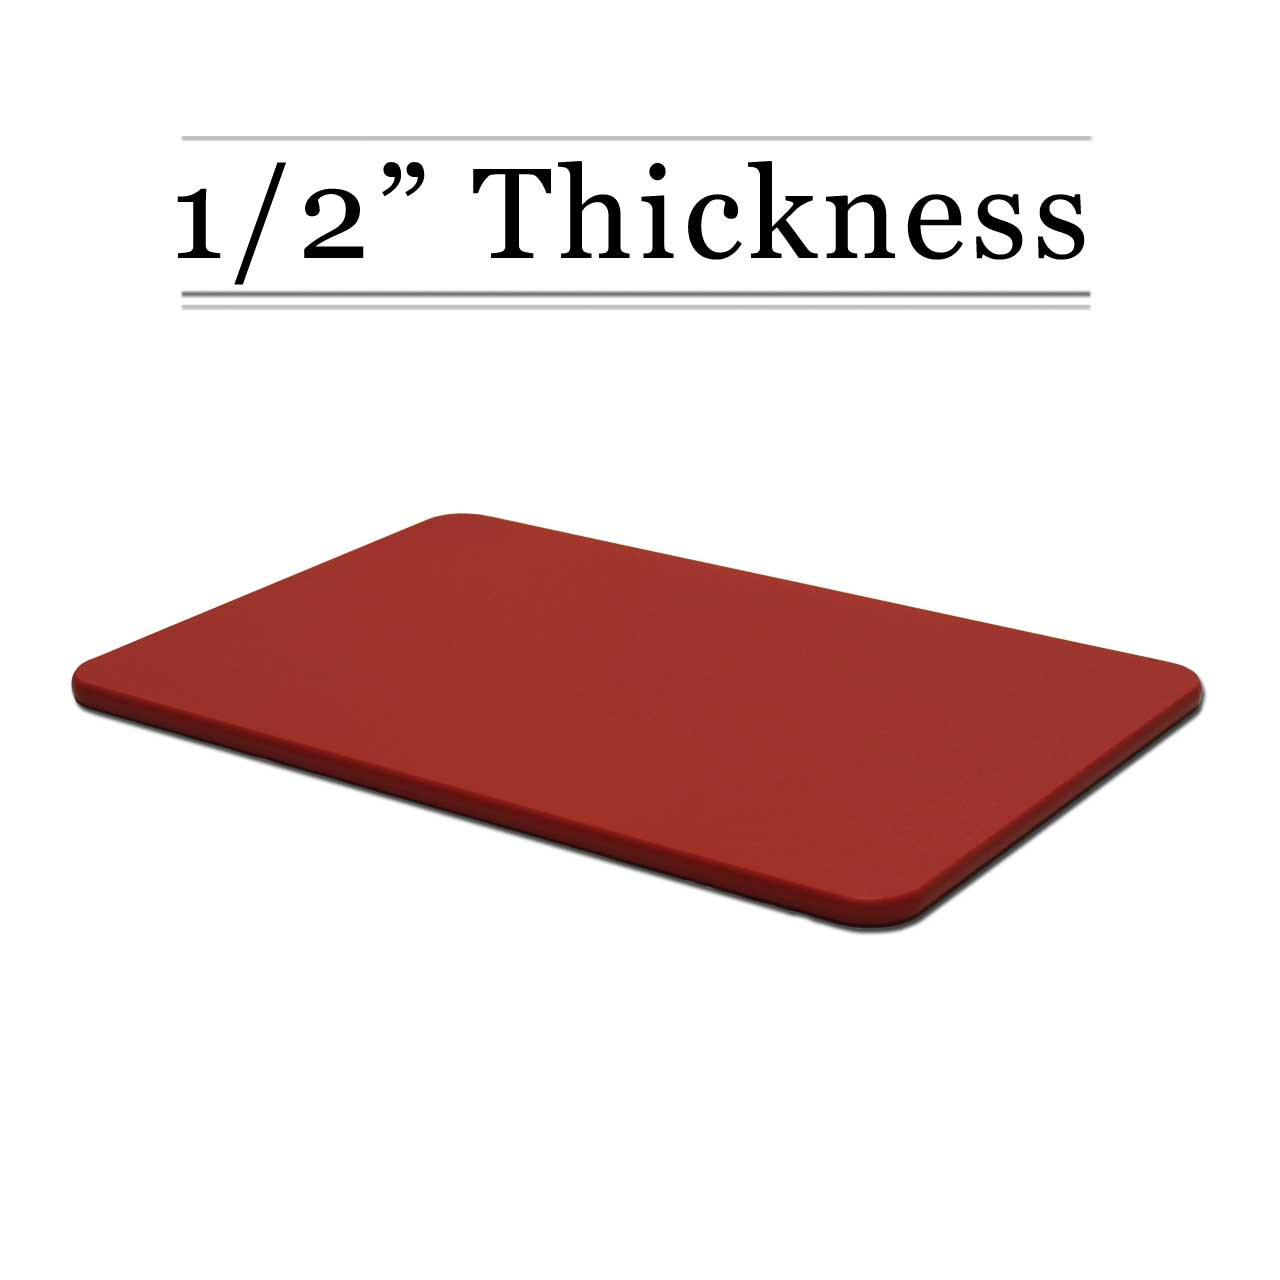 https://cdn1.bigcommerce.com/n-ou1isn/hdsjypr0/products/484/images/621/1_2_Thick_Red_Cutting_Board__40130.1502997678.1280.1280.jpg?c=2